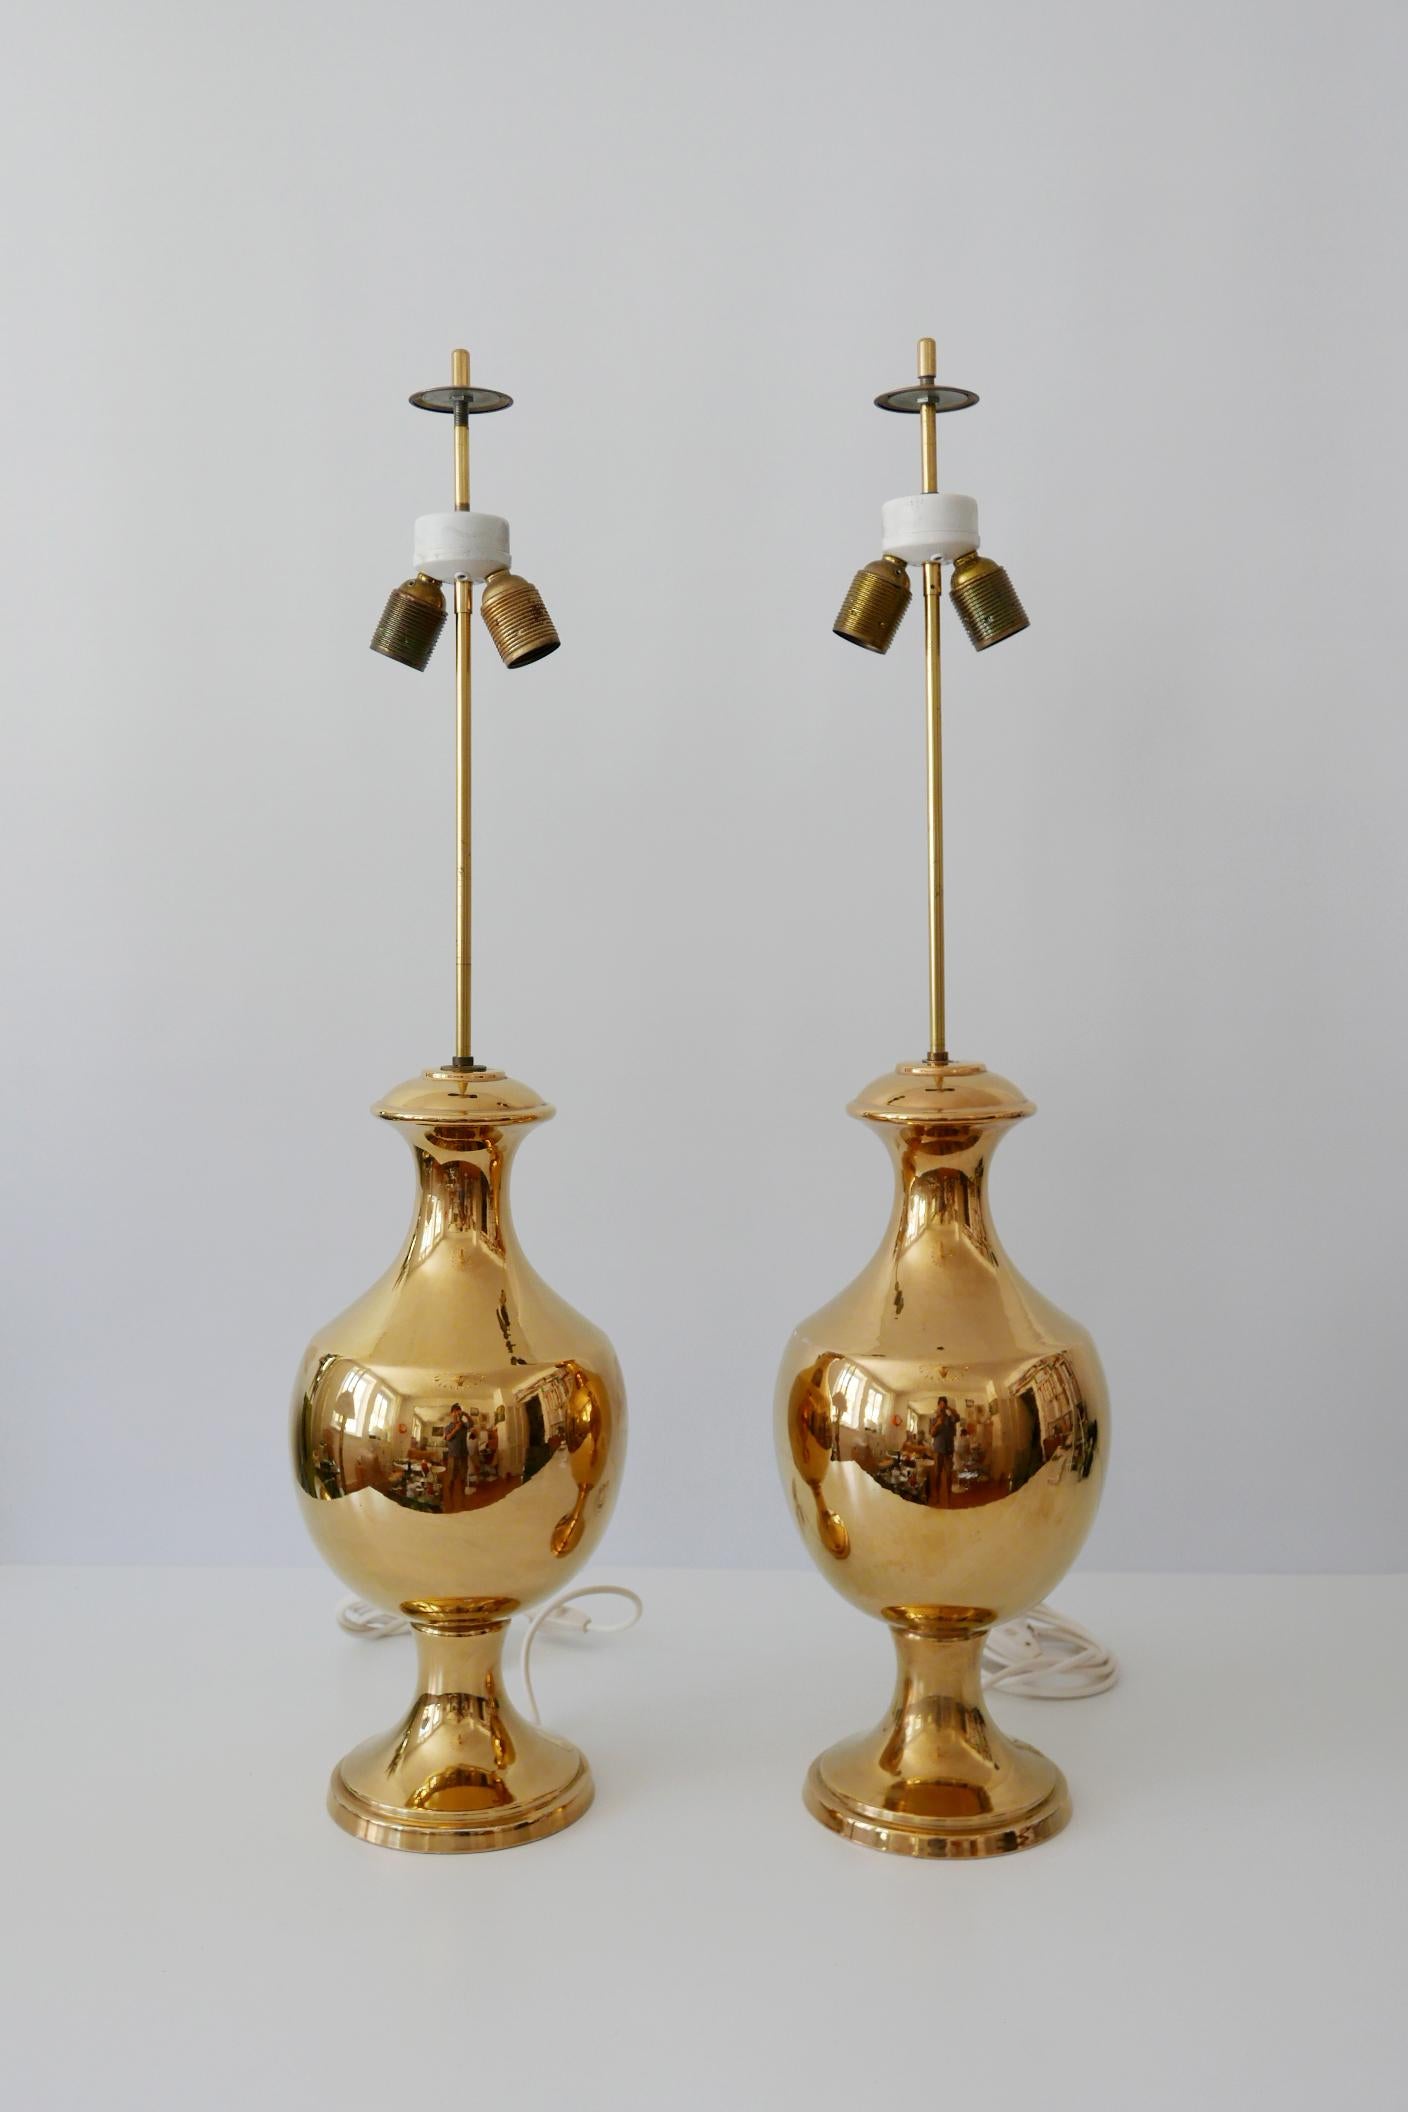 Set of Two Huge Gold Glazed Ceramic Table Lamps by Behreno Firenze 1960s Italy In Good Condition For Sale In Munich, DE